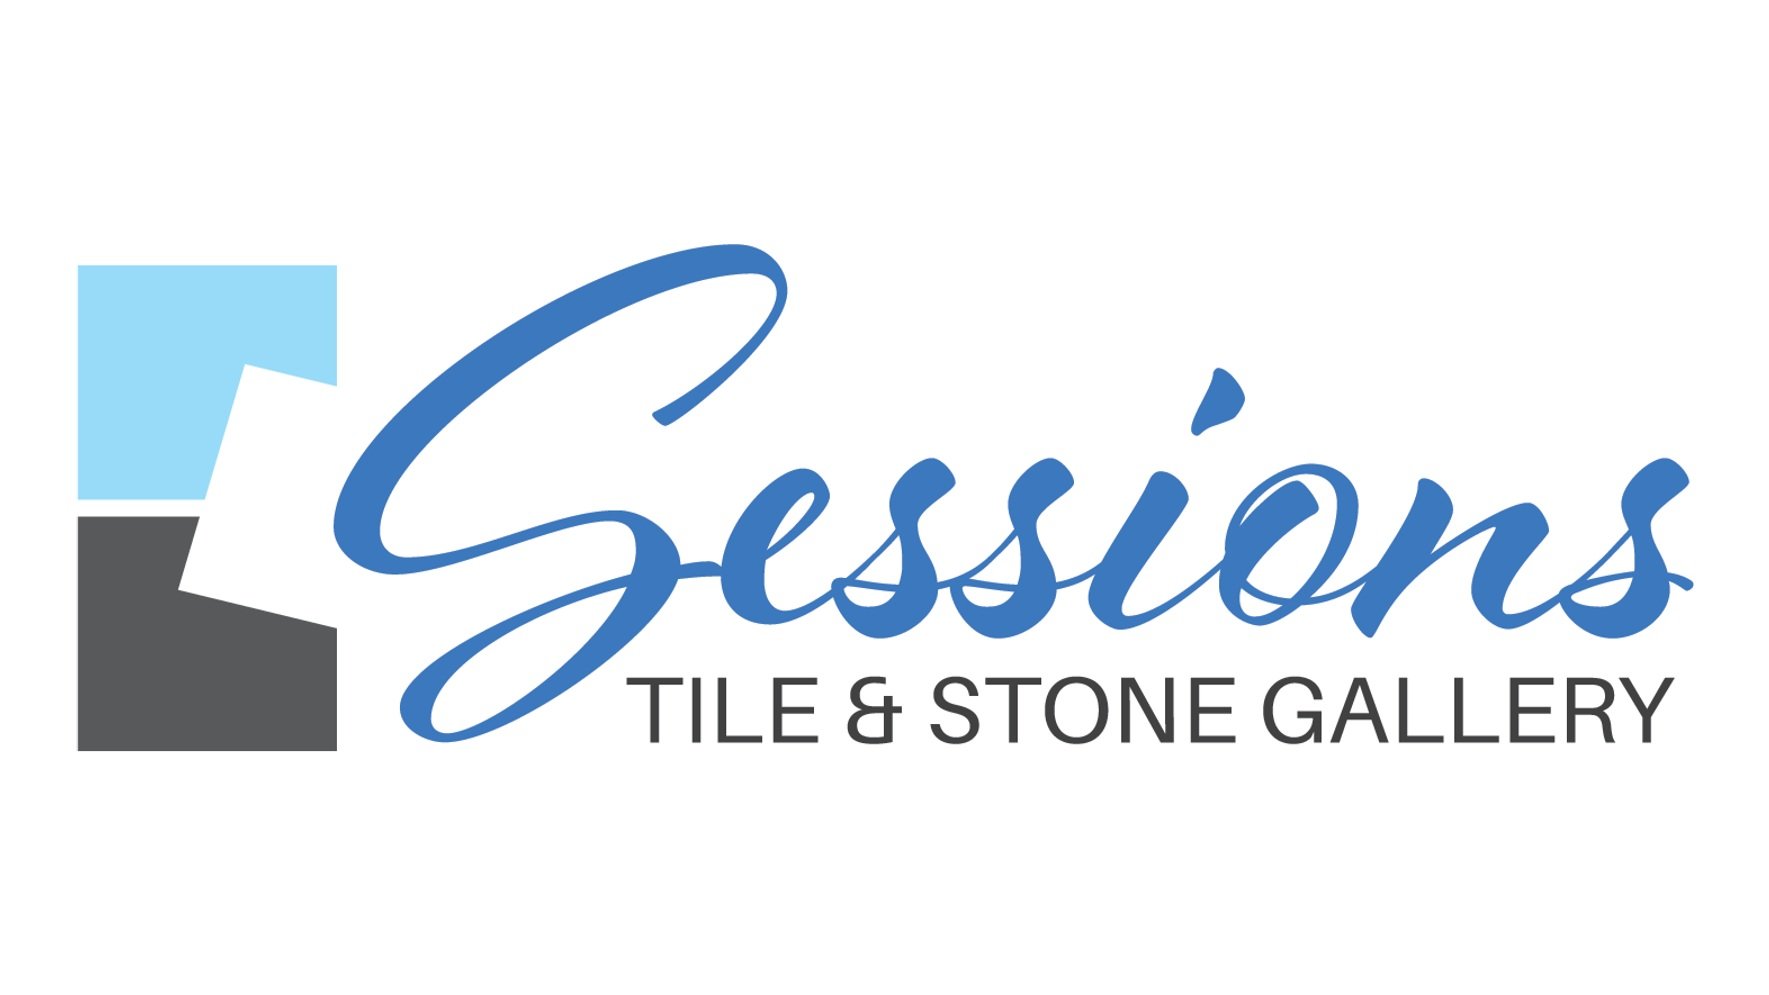 New+Sessions+Tile+%26+Stone+Gallery+Logo+-+curves.jpg